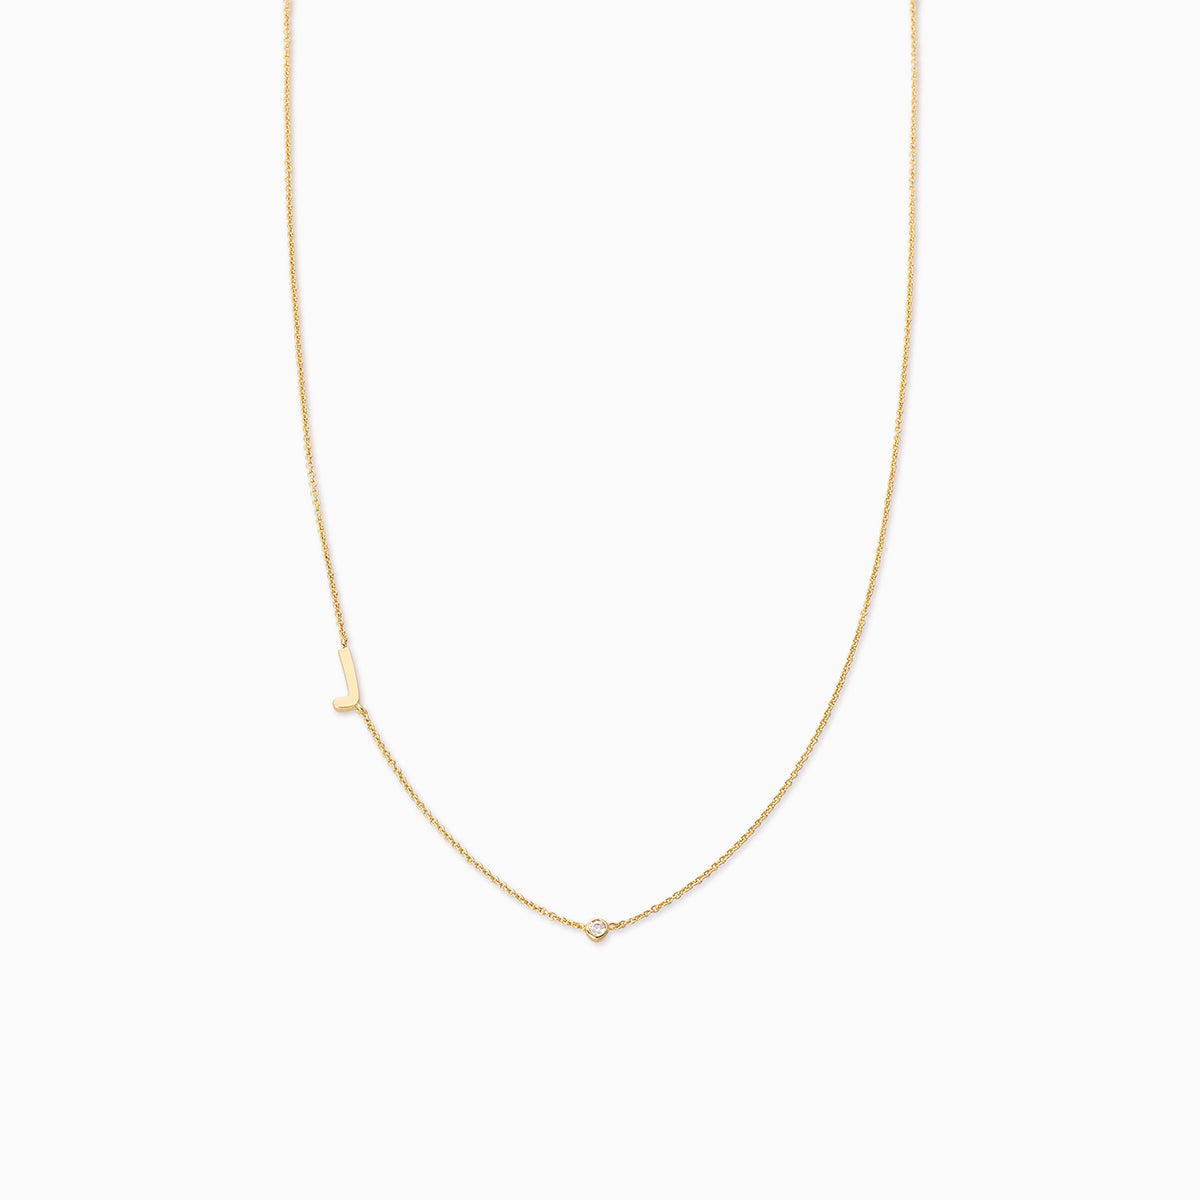 Personalized Touch Initial Chain Necklace in Gold | Uncommon James